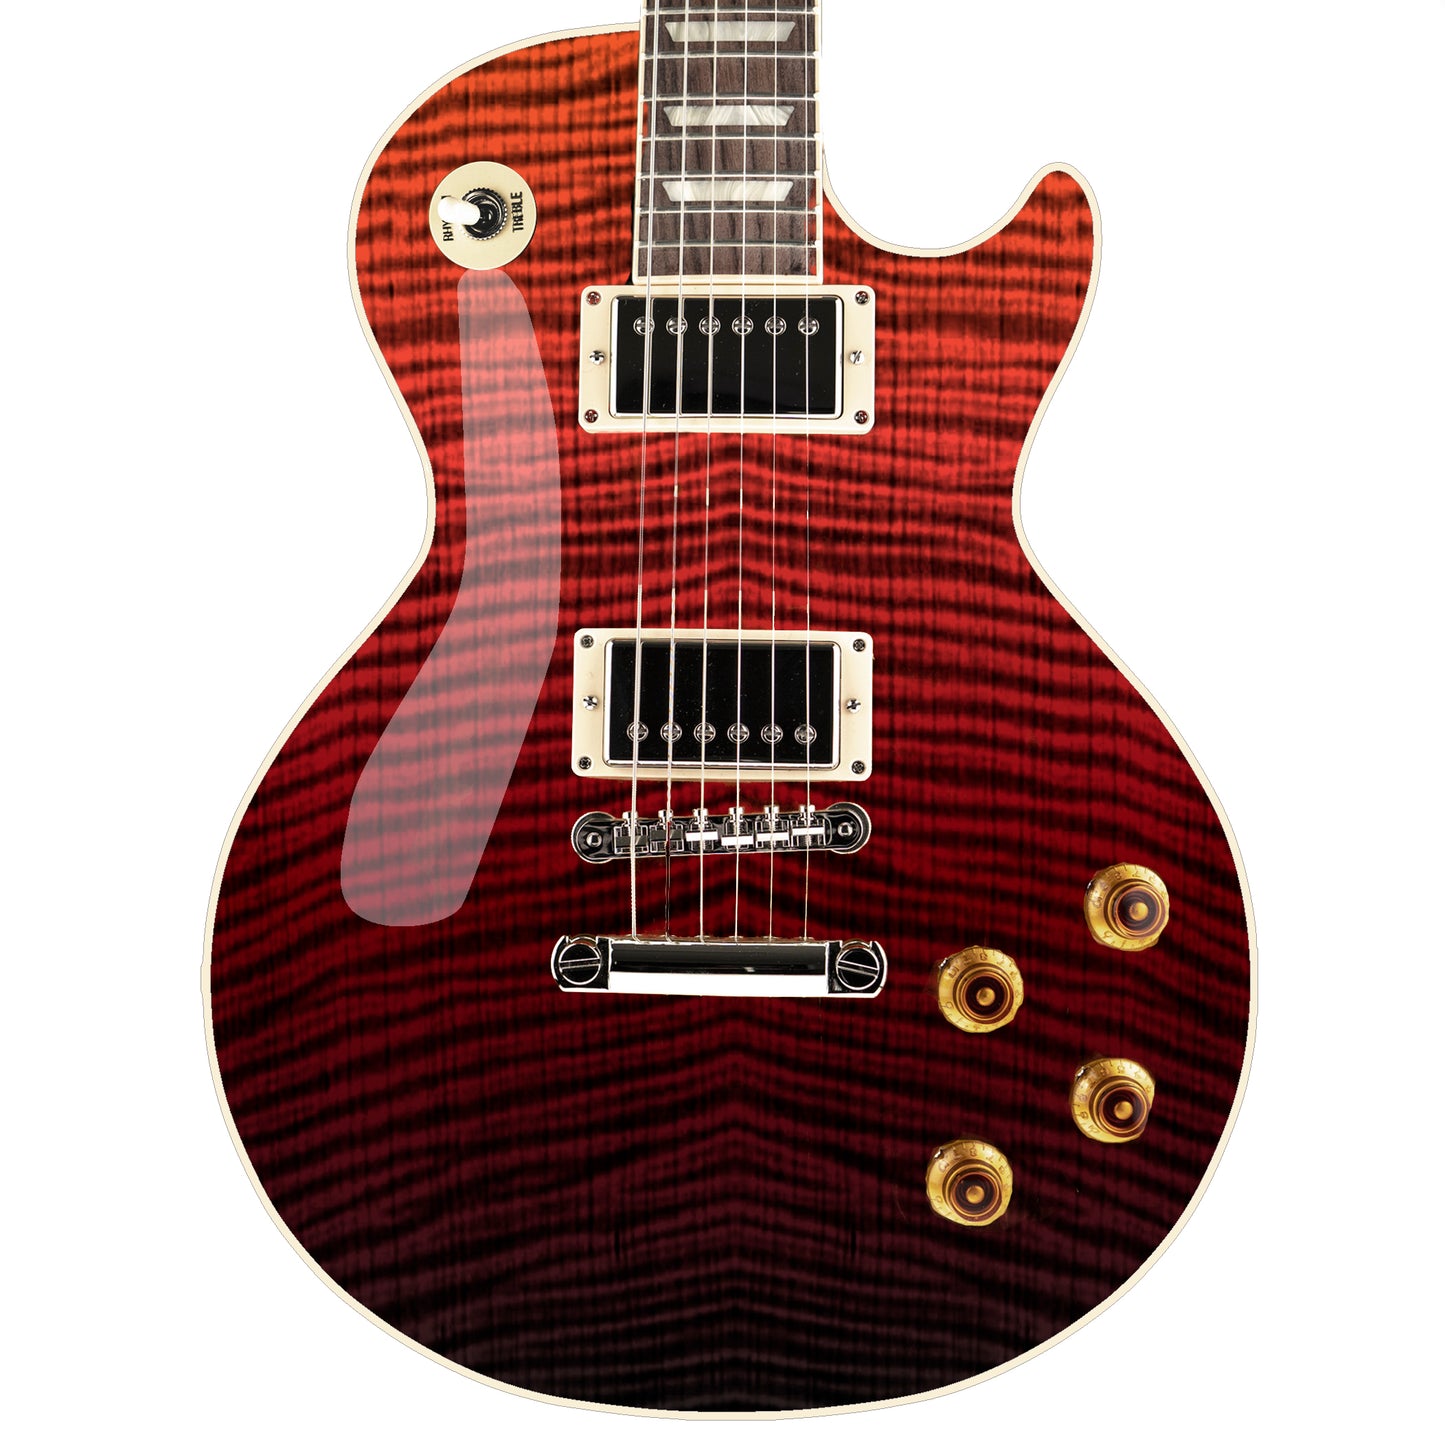 Guitar Skin Wrap Laminated Vinyl Decal Sticker The Cherry Fade Flamed Maple GS57